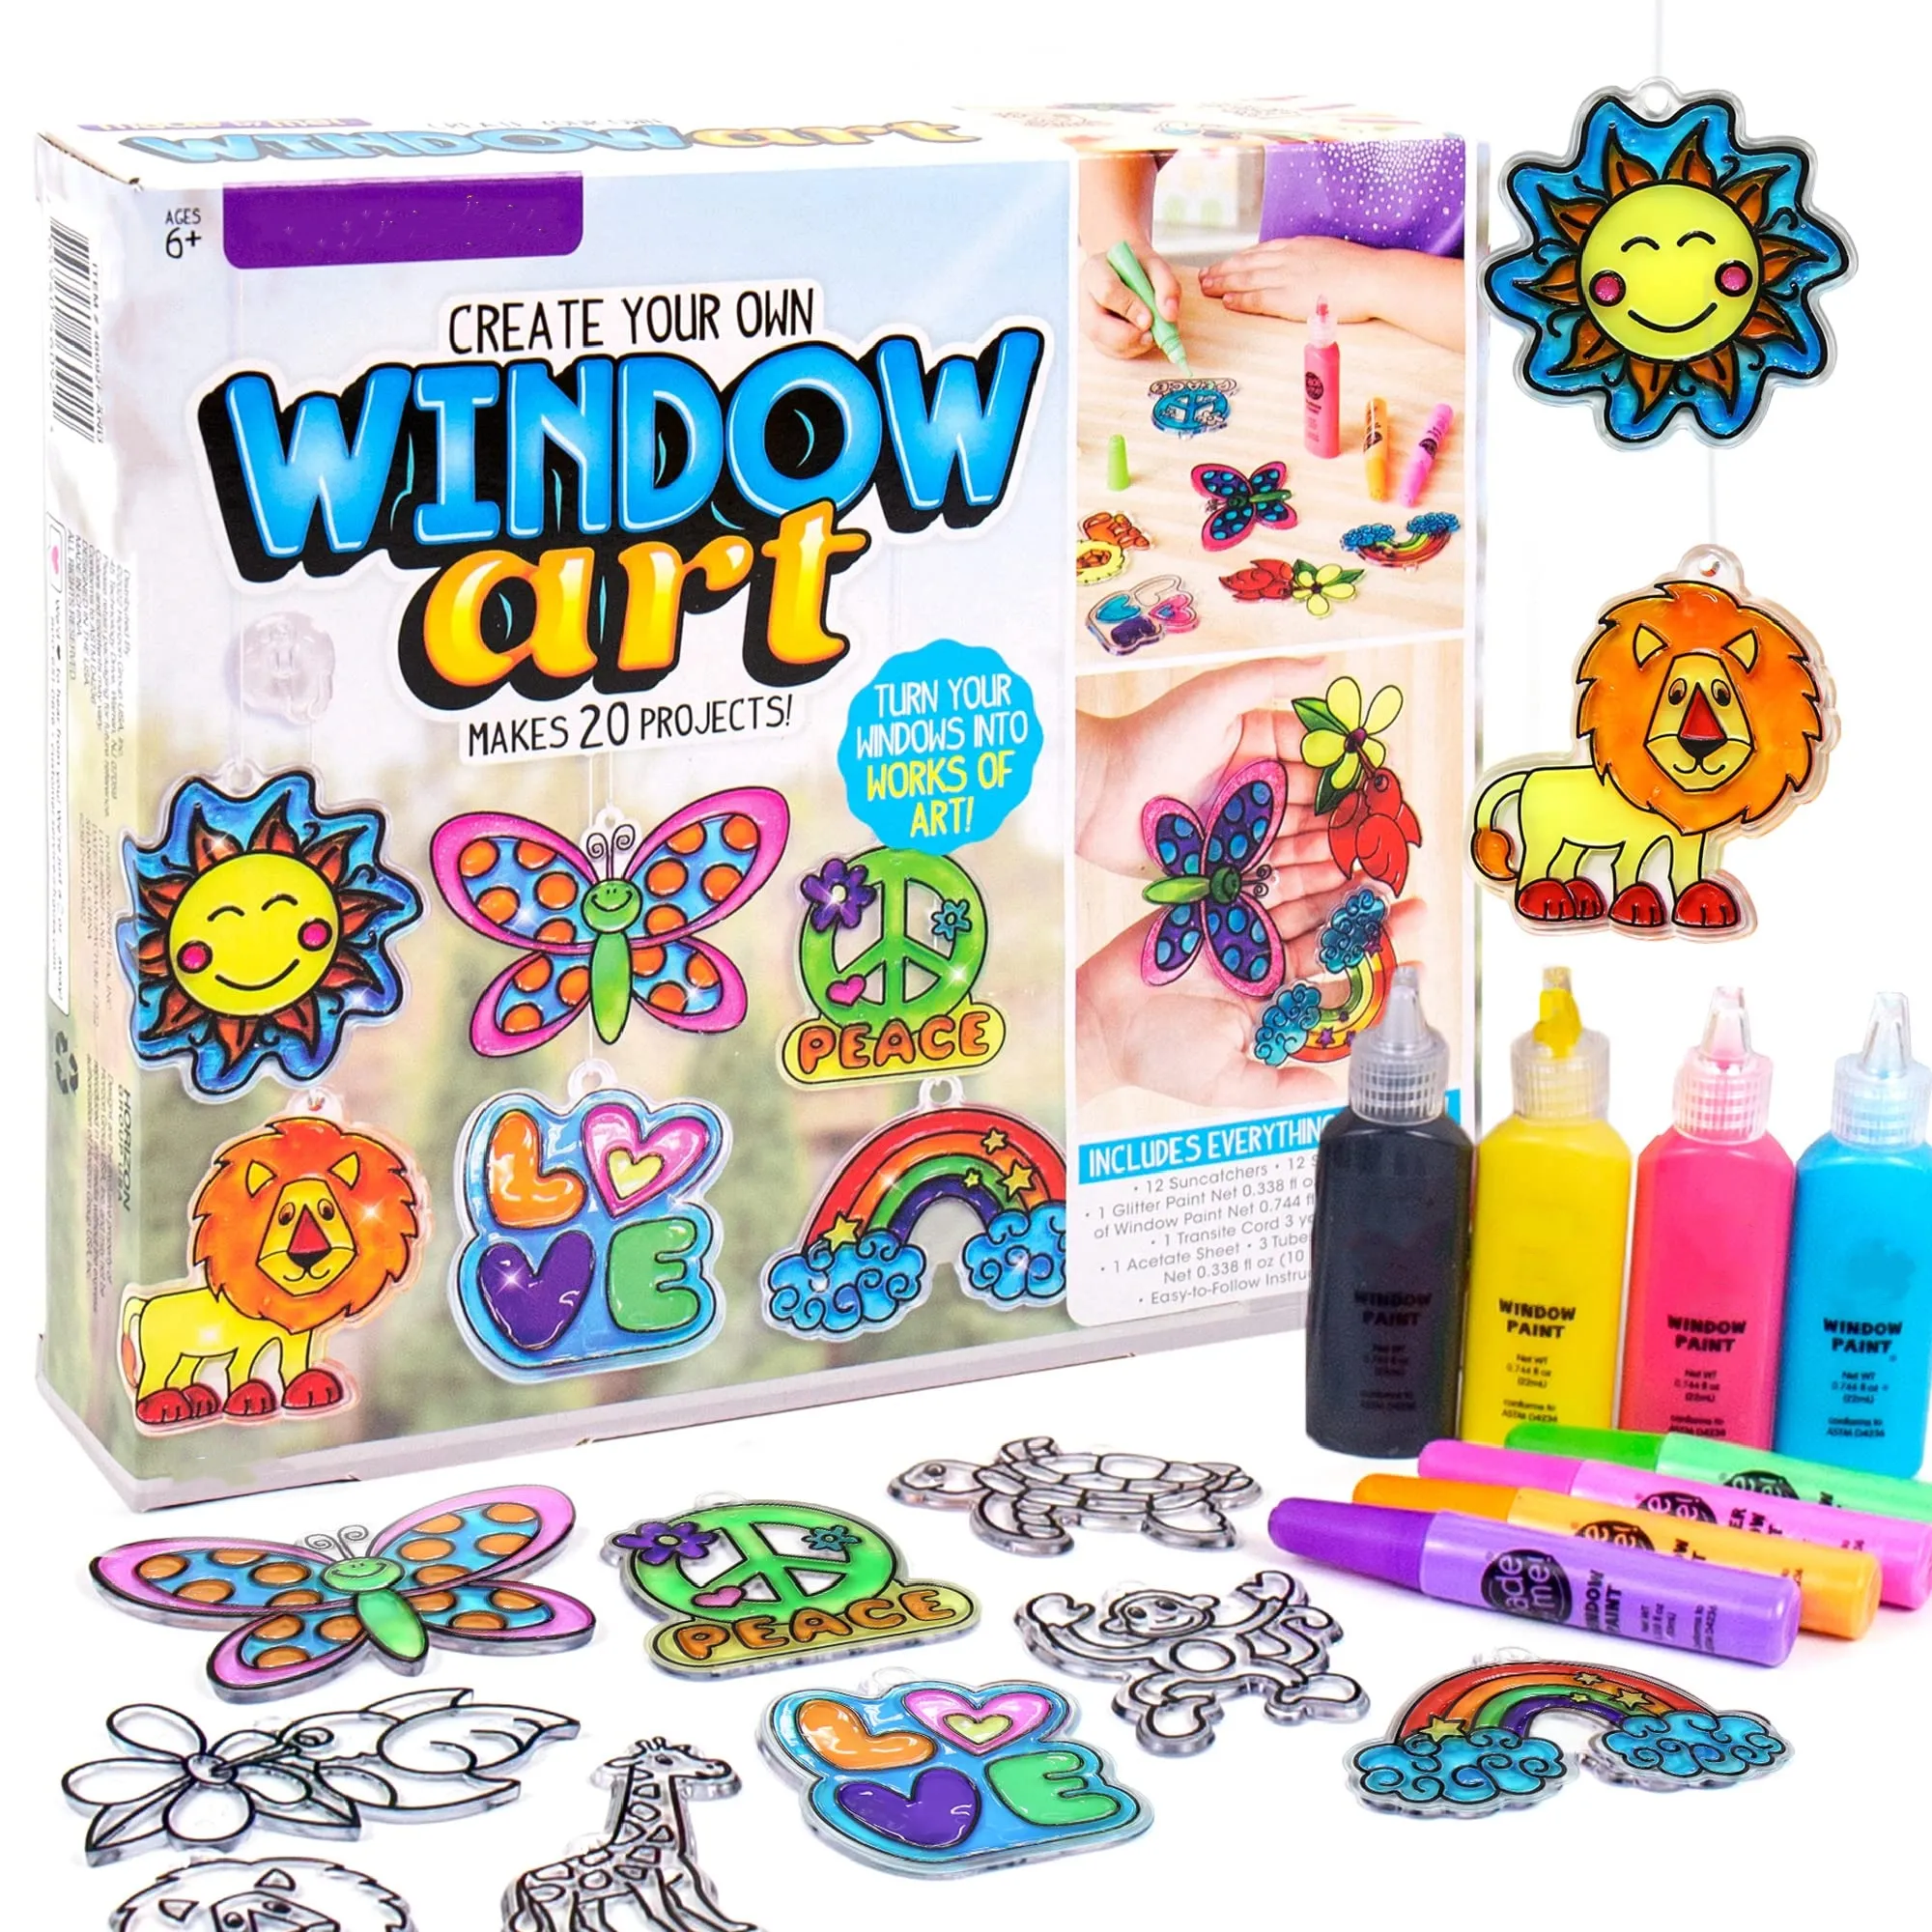 Paint Your Own Suncatchers DIY Art and Craft Kit for Kids Fun activity and Party Idea